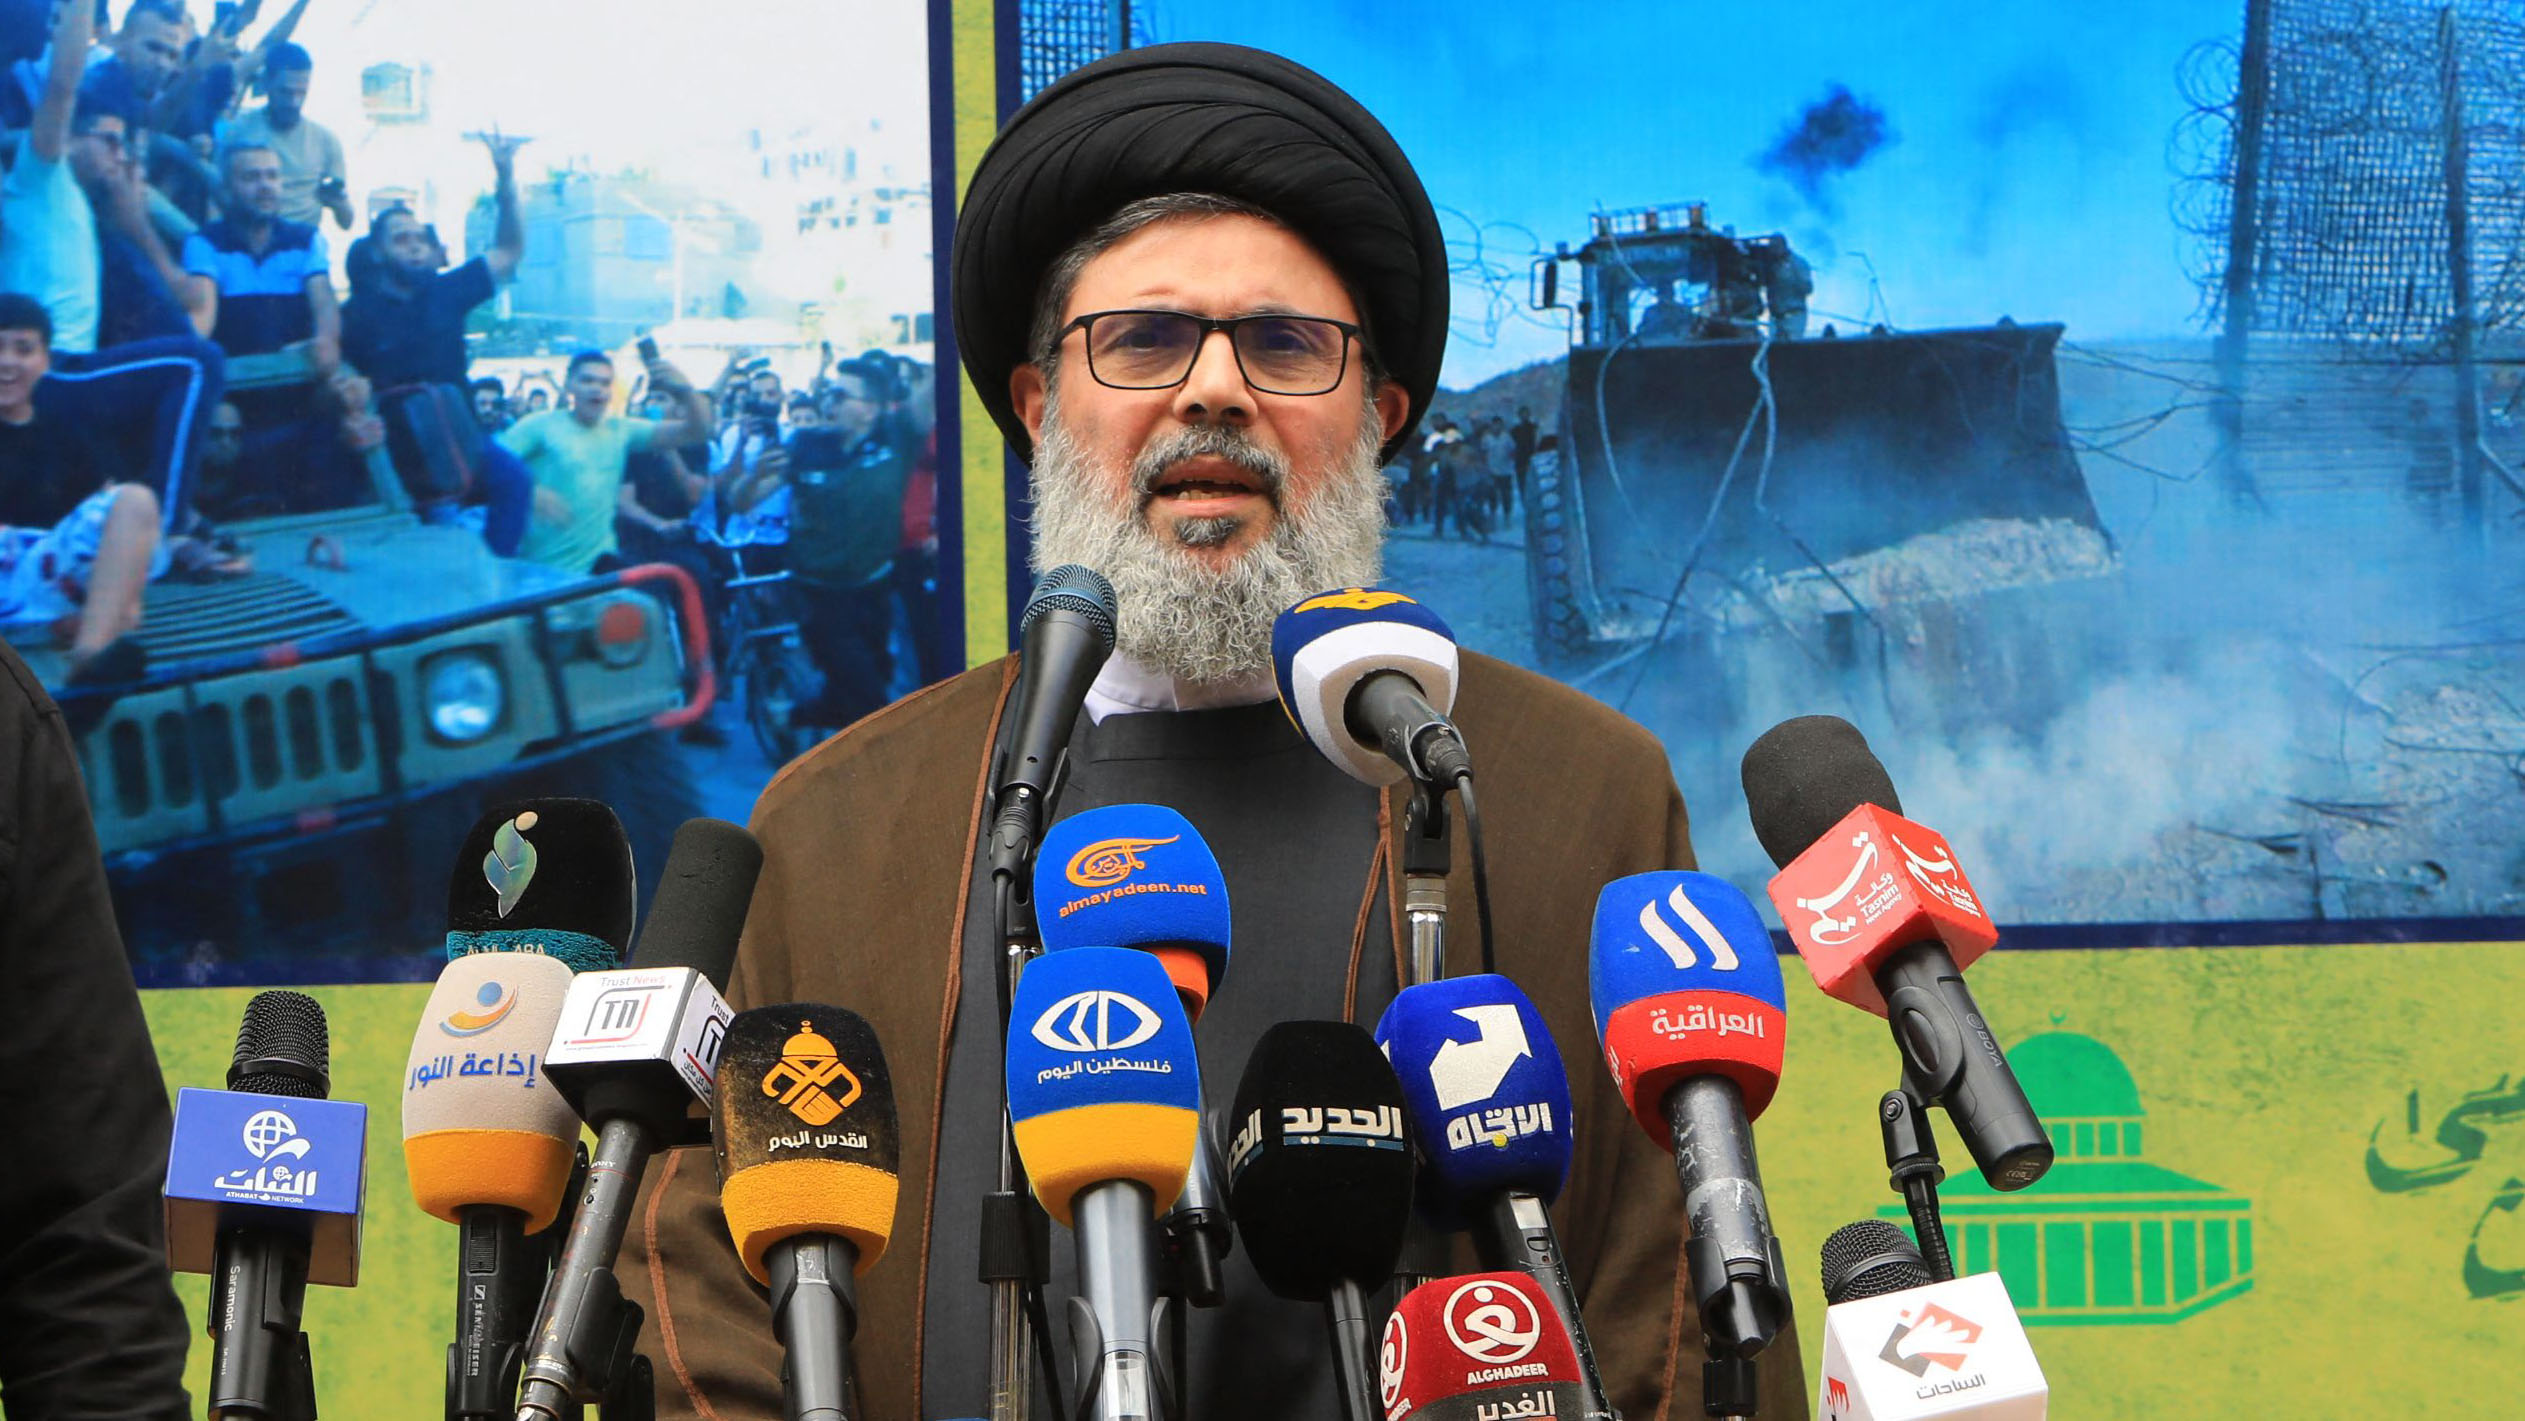 Hezbollah leaders: More lethal attacks on Israel imminent from Lebanon.